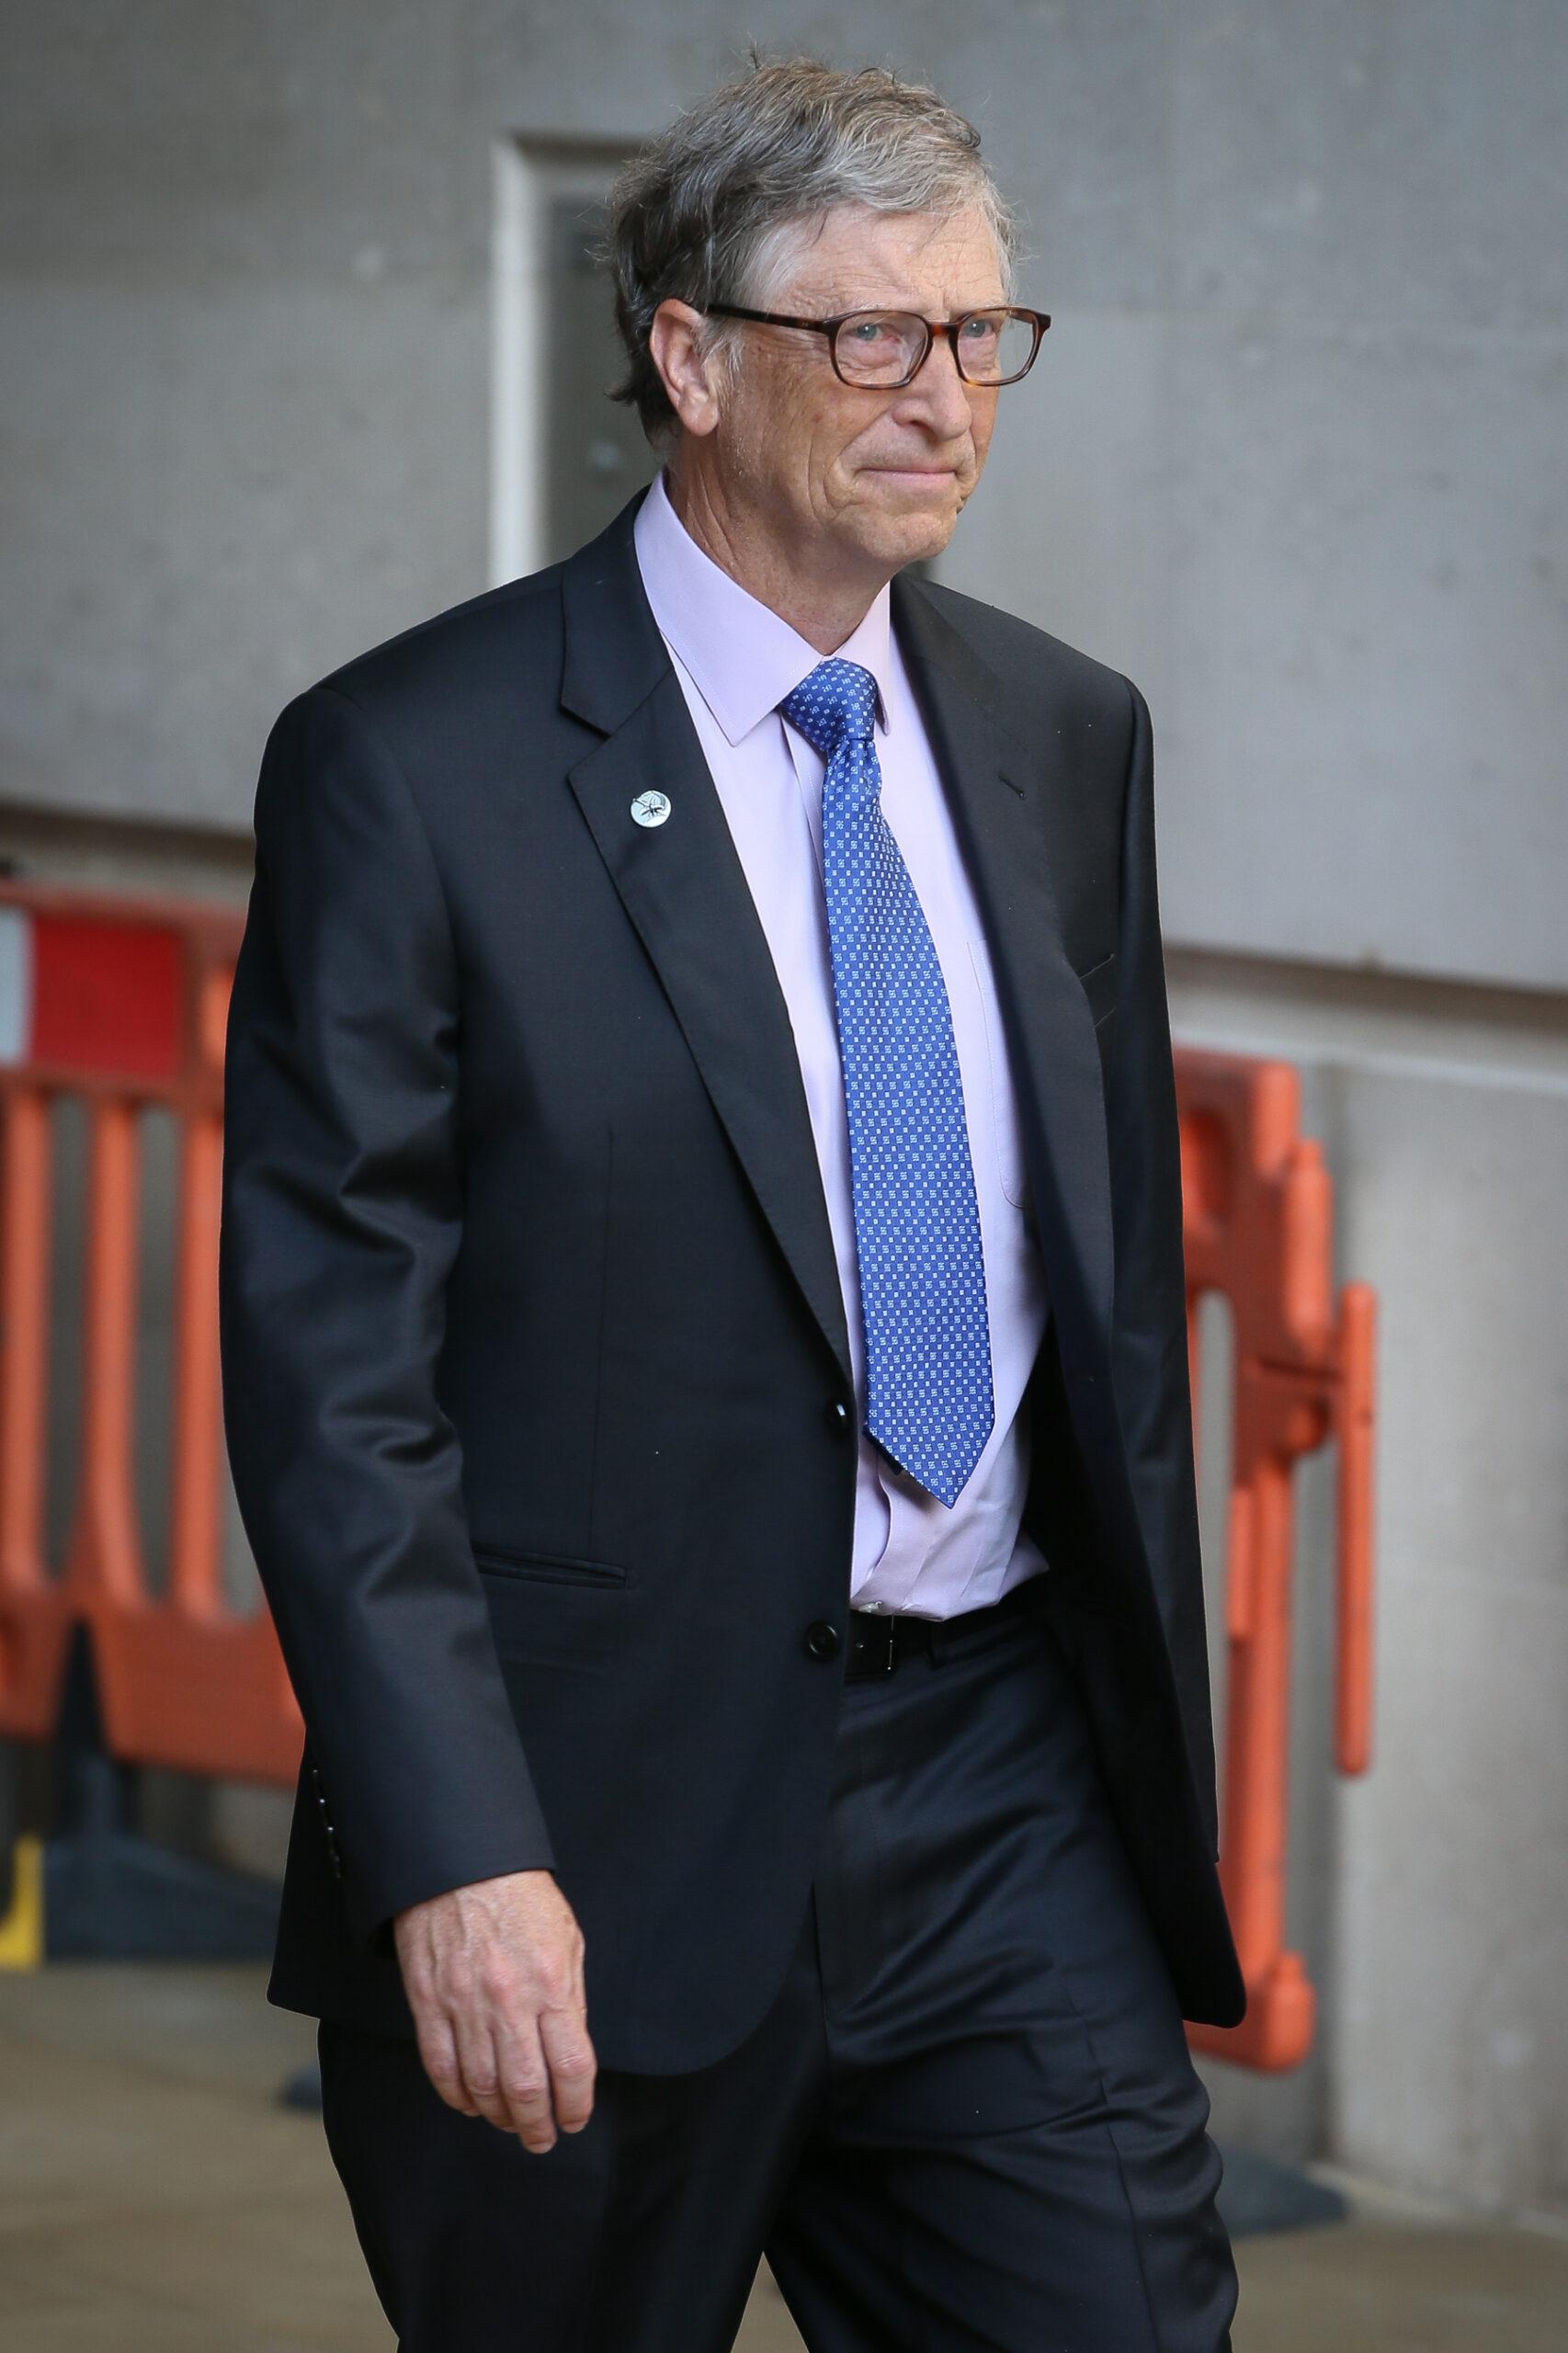 Bill Gates leaving BBC Radio Studios after being interviewed fighting against malaria - London